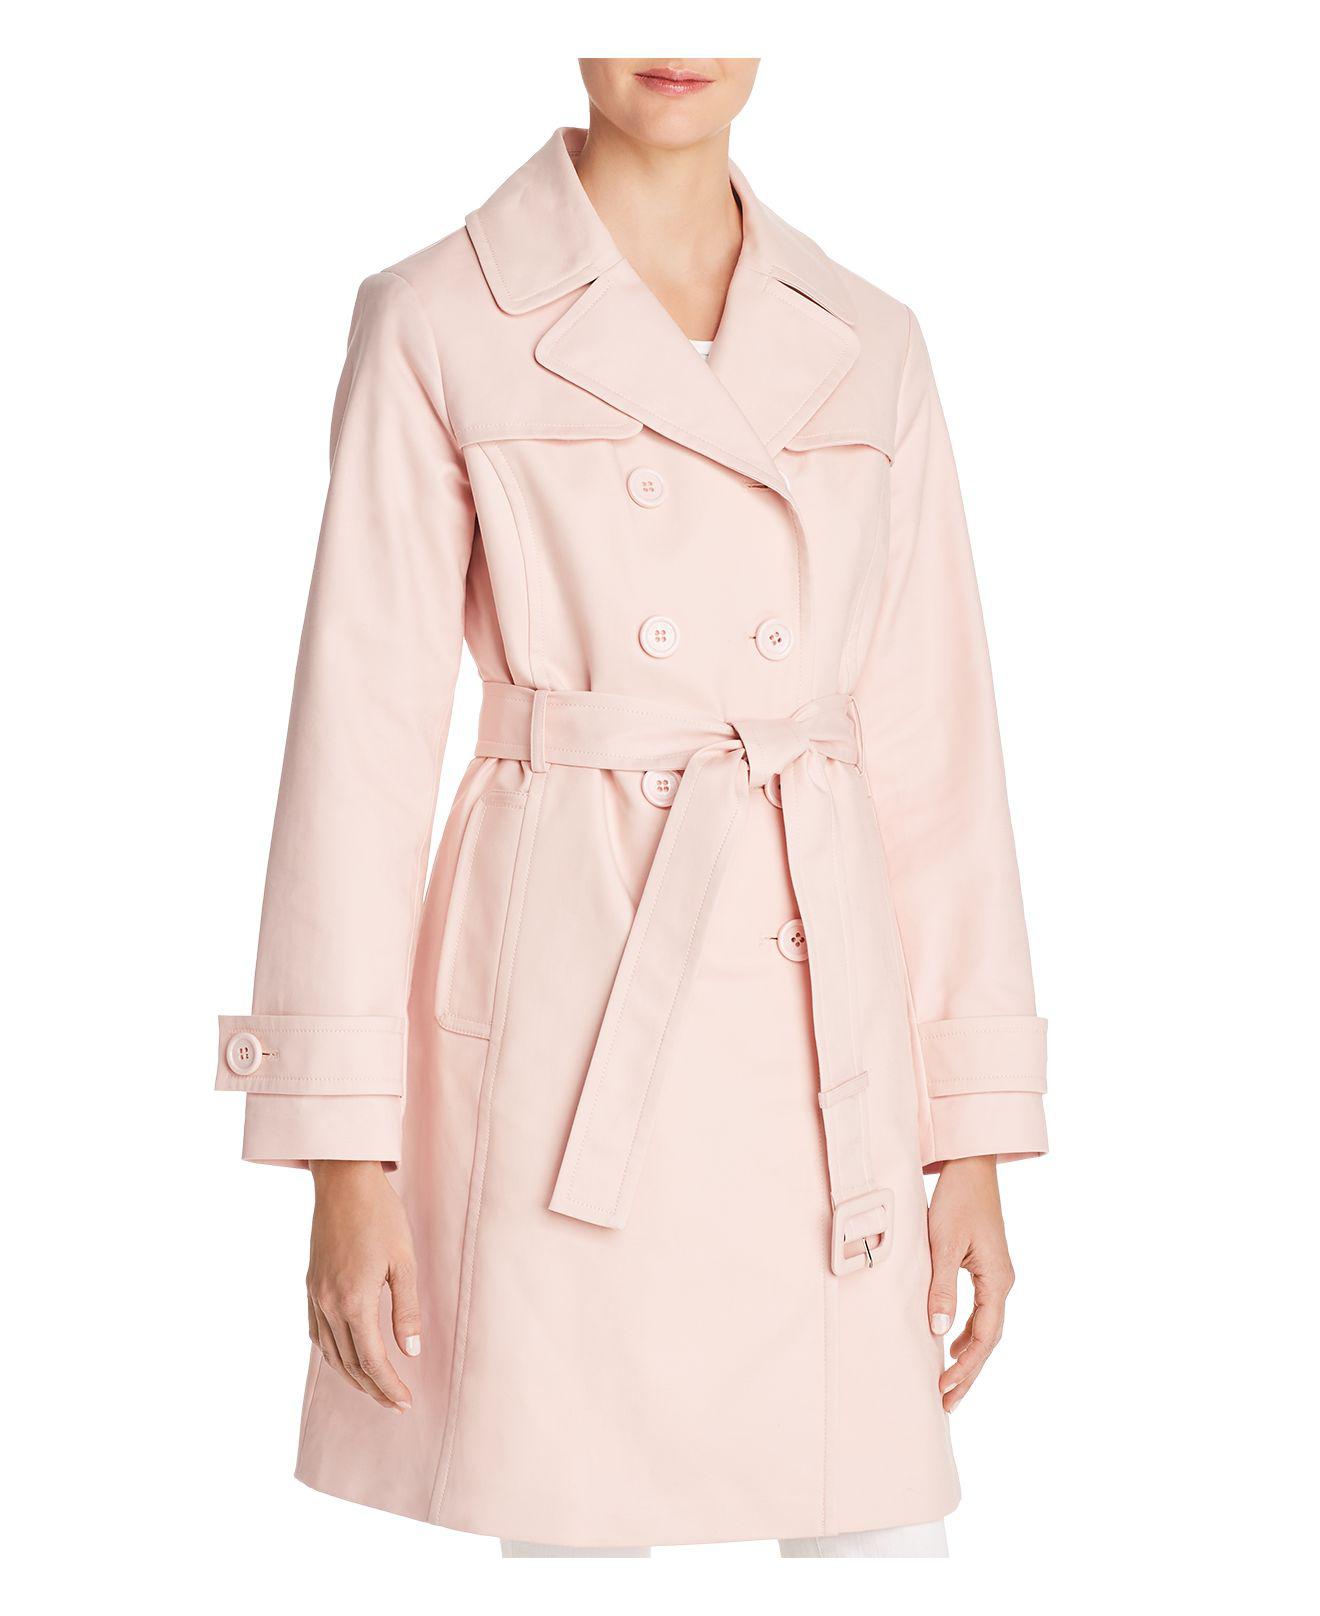 Kate Spade Double-breasted Bow Back Trench Coat in Pink - Lyst